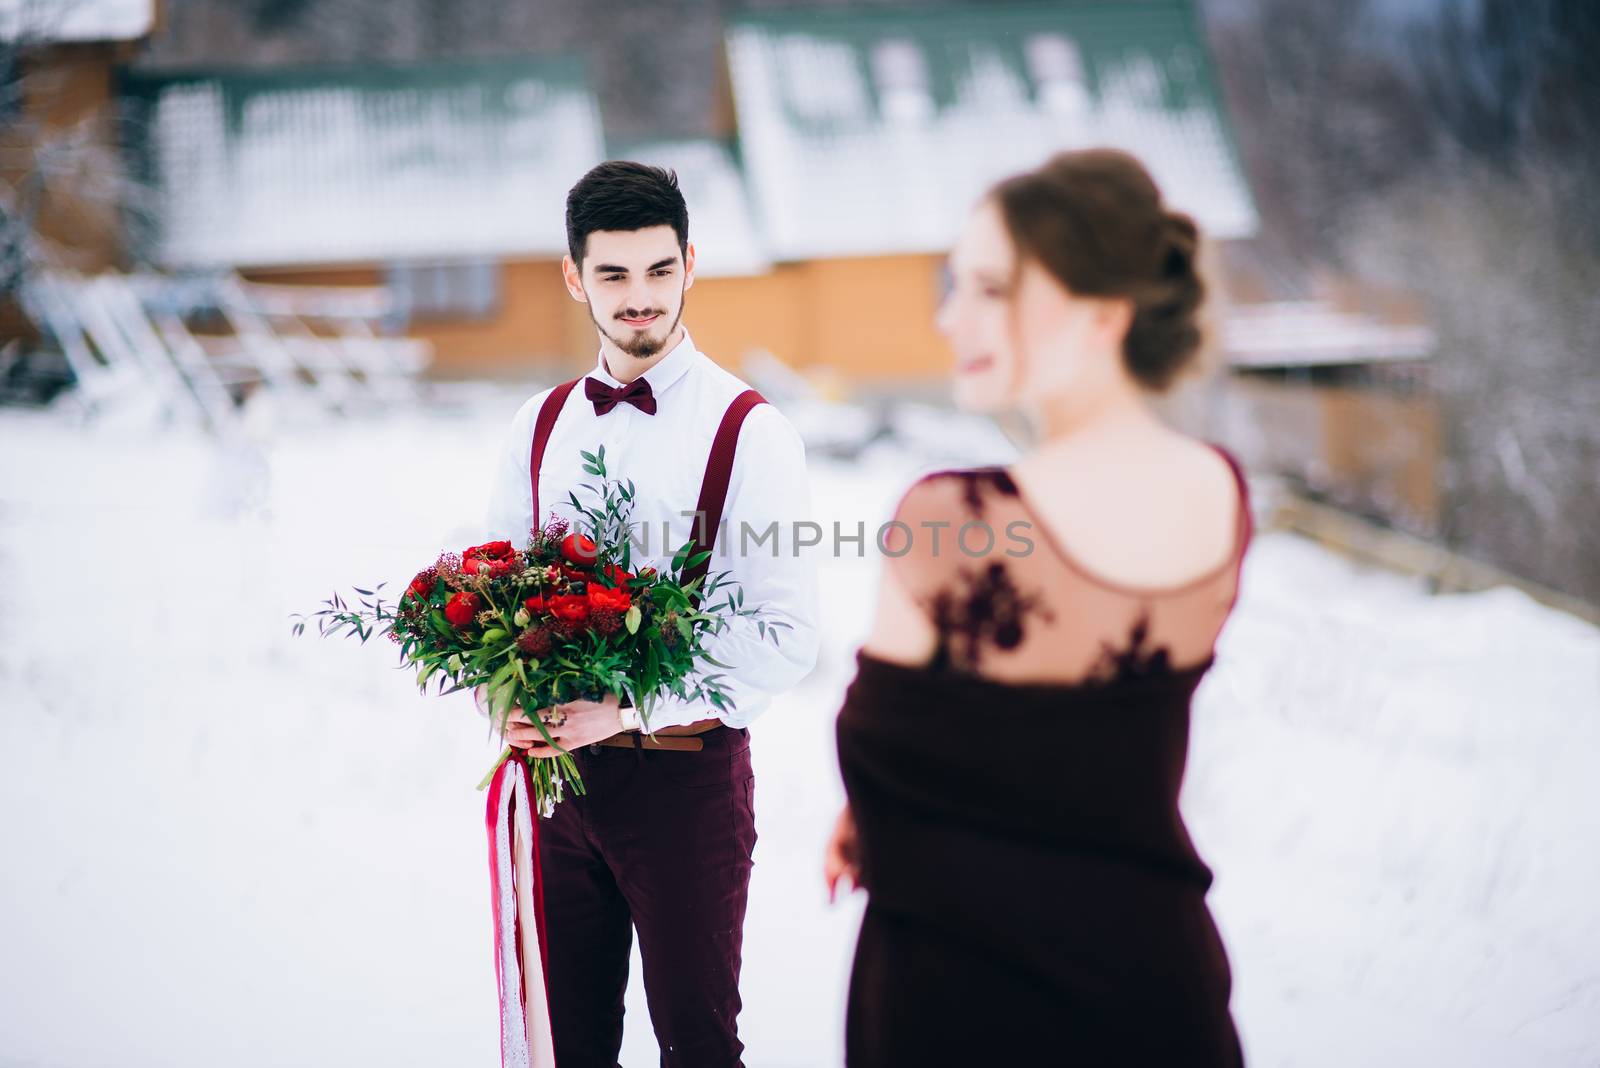 walk the groom and the bride in the Carpathian mountains by Andreua